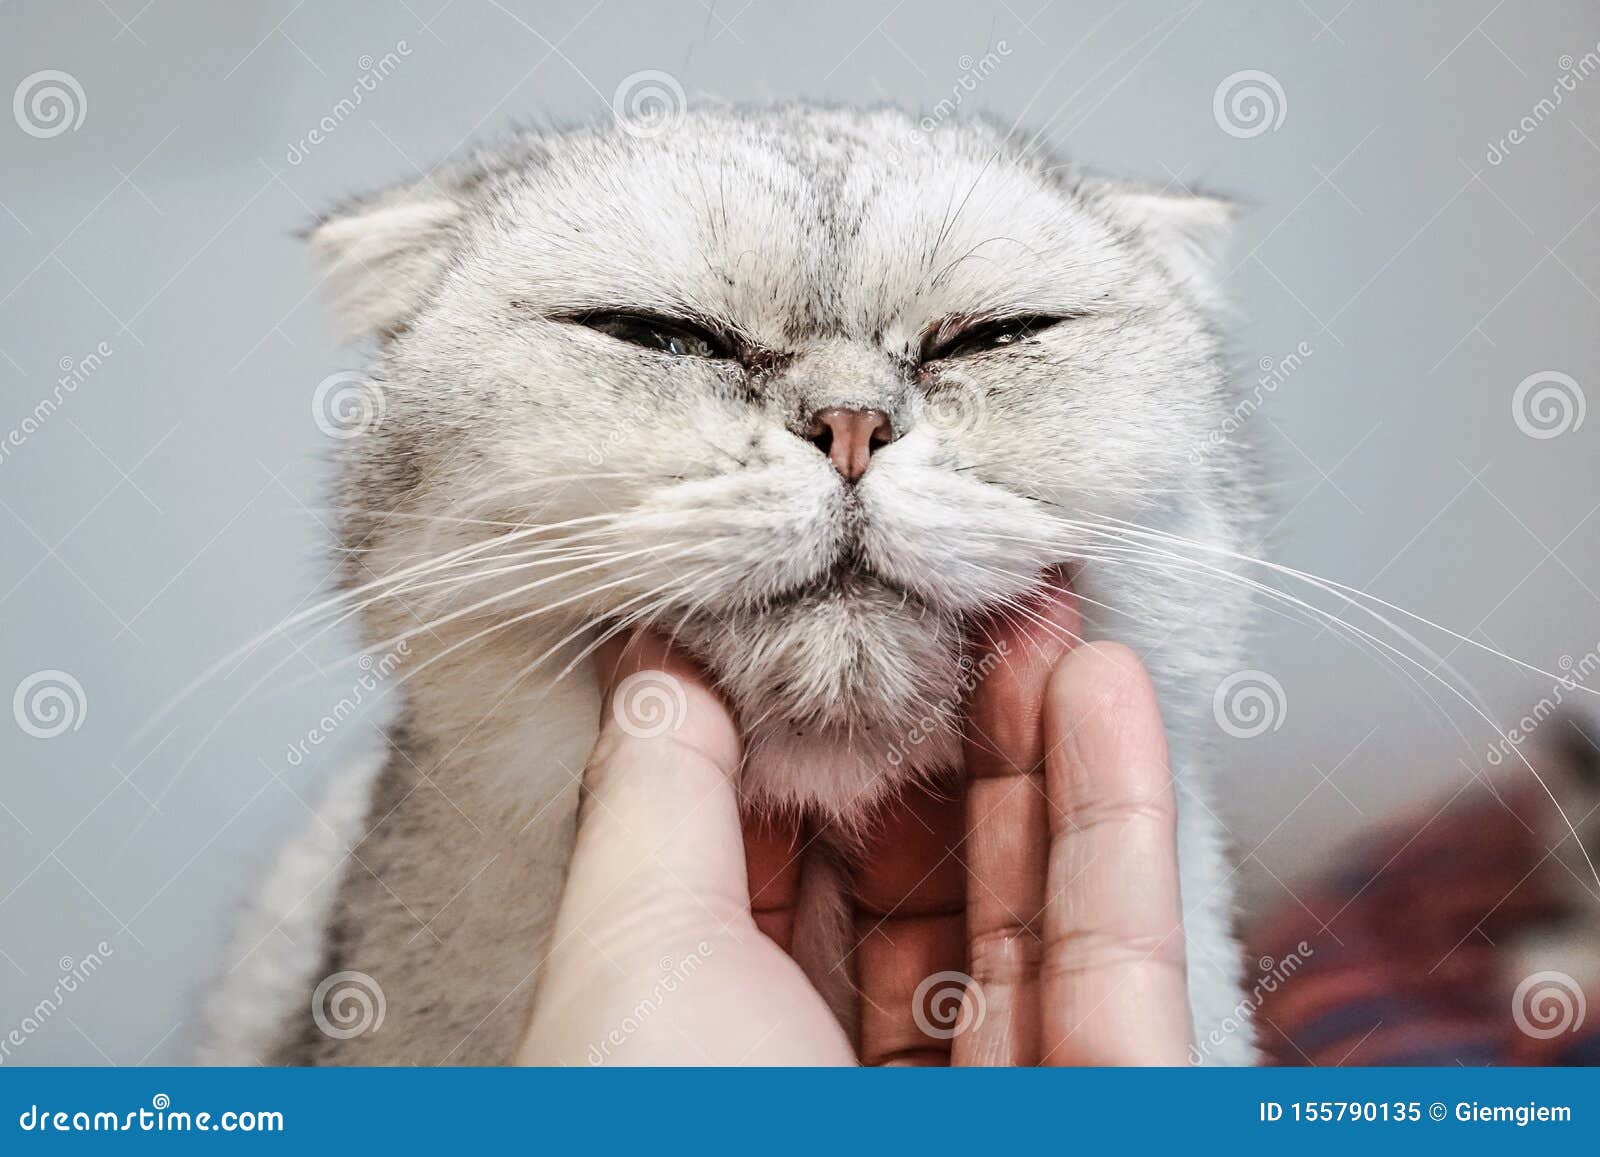 use hand stroking the exotic shorthair cat neck and make the happy cat spellbound and close eye